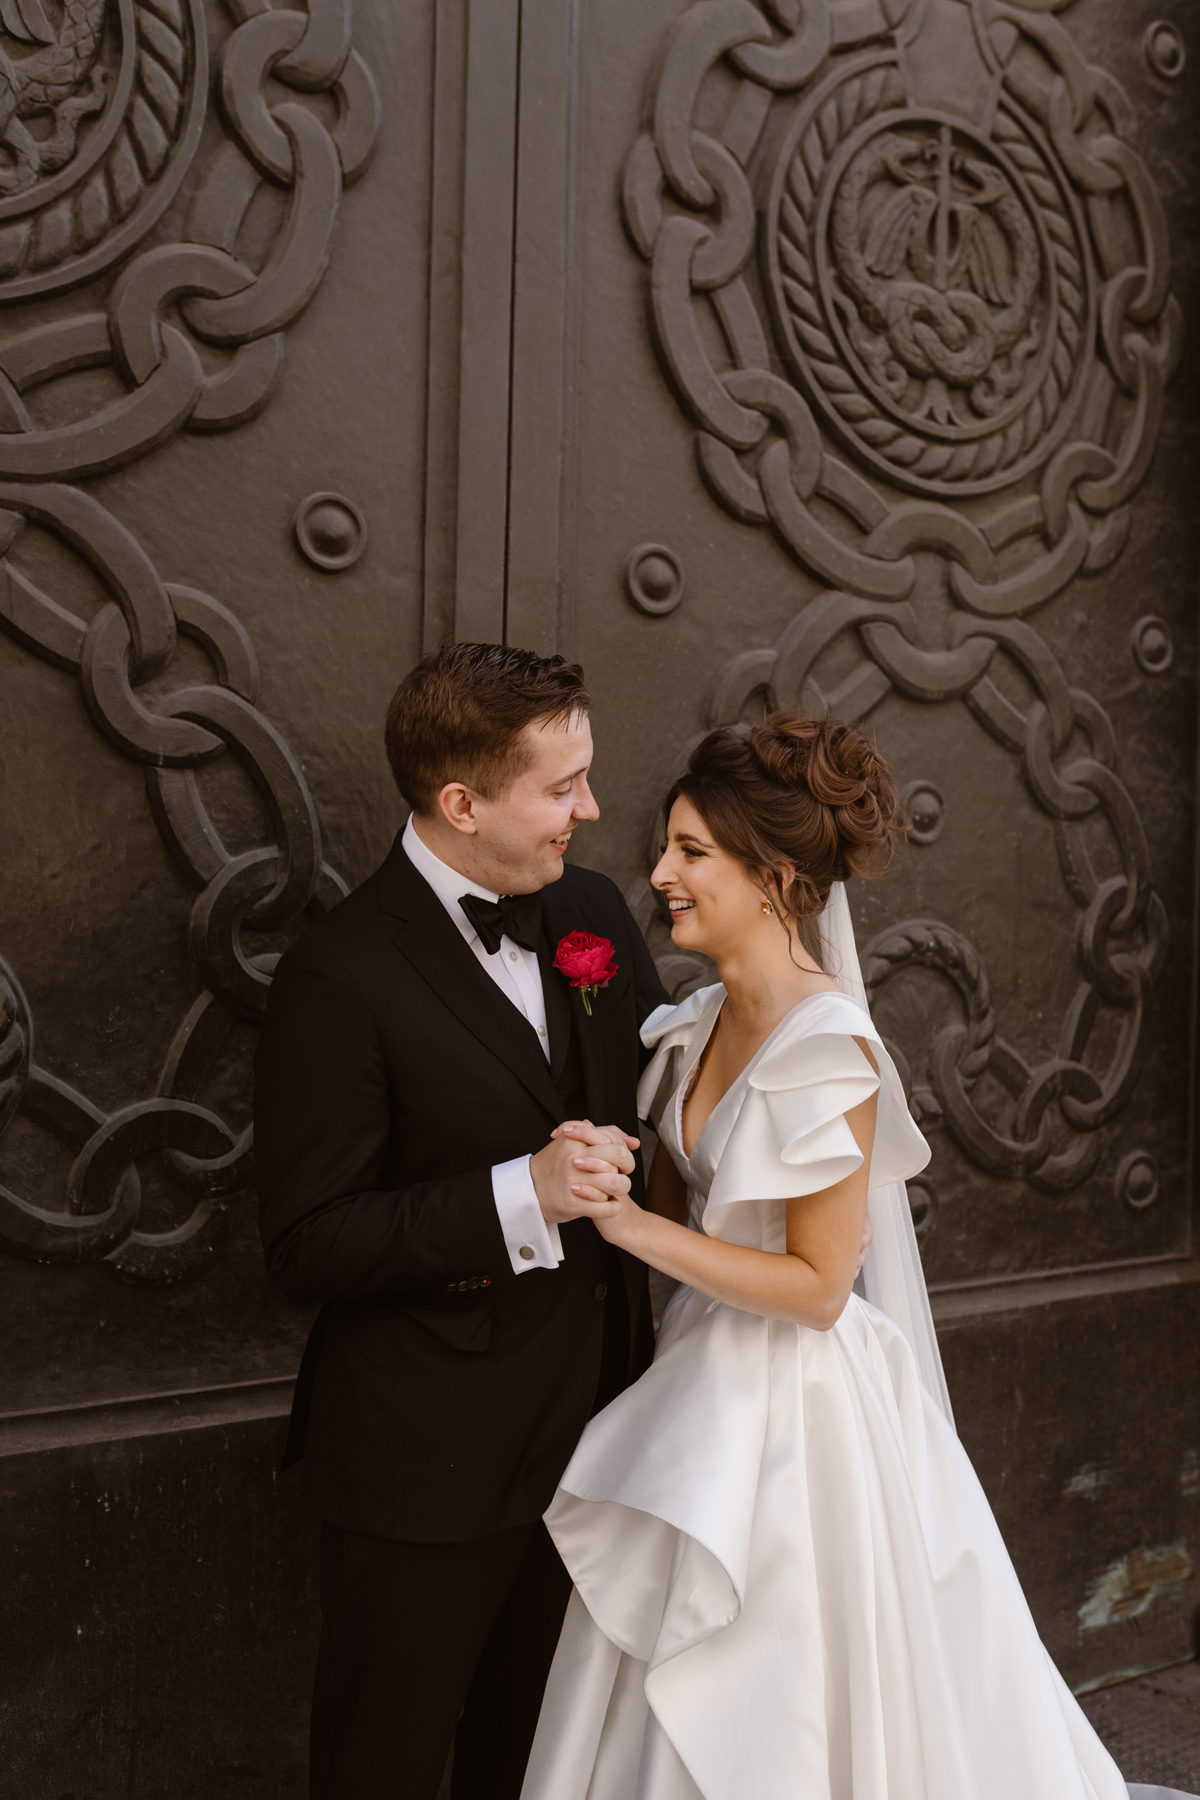 Simona in Gemy Maalouf for her Classy City Wedding at The Ned, London | Love My Dress®